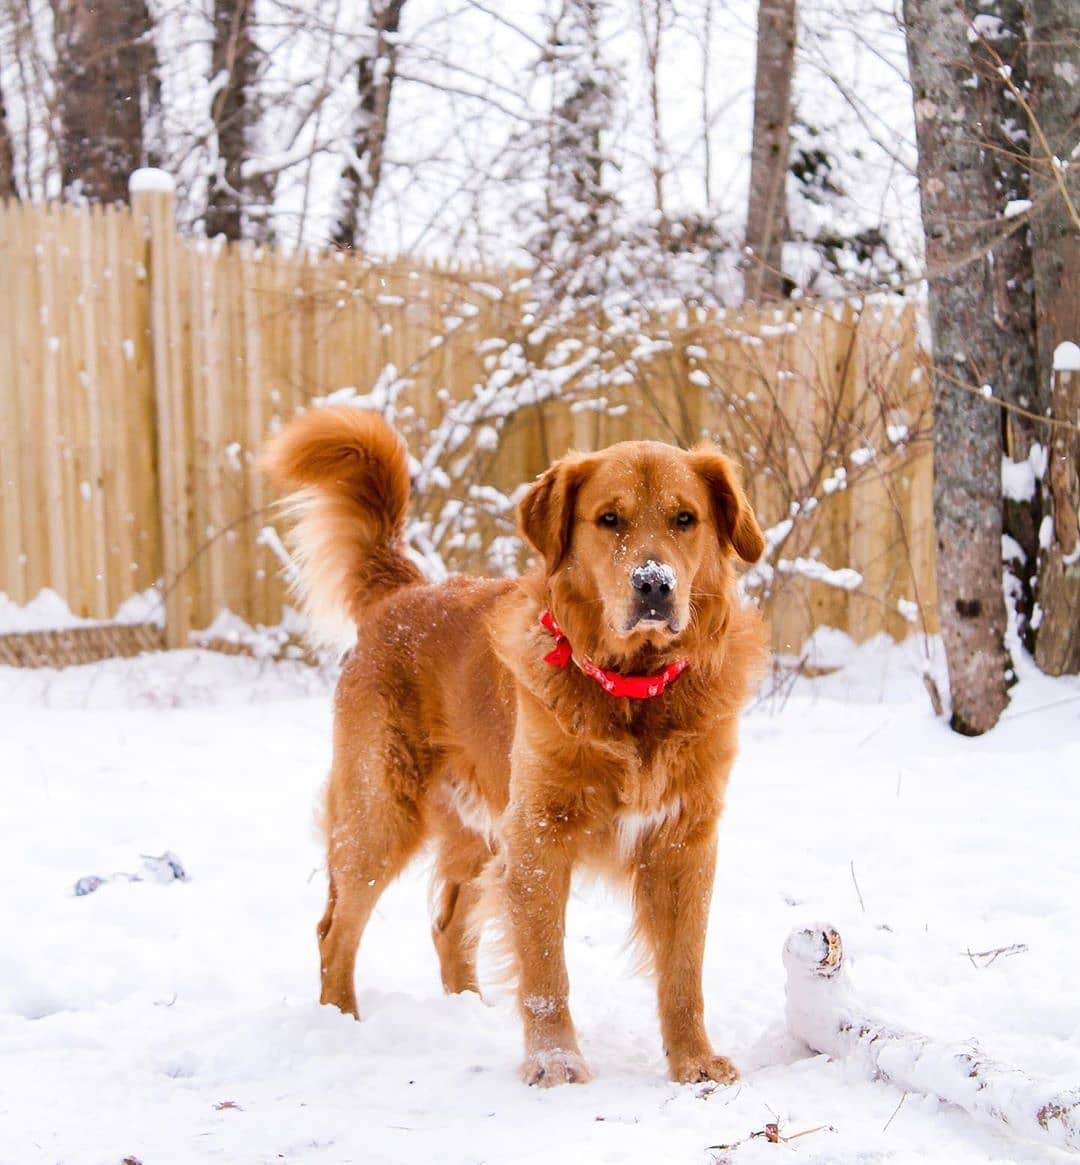 From @cmae_photography • • • • • • Lower Sackville, Nova Scotia We’re so excited for more snow ❄️ ⁣ ⁣ ⁣ ⁣ ⁣ ⁣ ⁣ ⁣ #dogs #hfxdogs #dogsofinstagram #snow #halifax #novascotia #halifaxphotographer #dogphotography #goldensofinstagram #goldenretriever #boop #goodboy